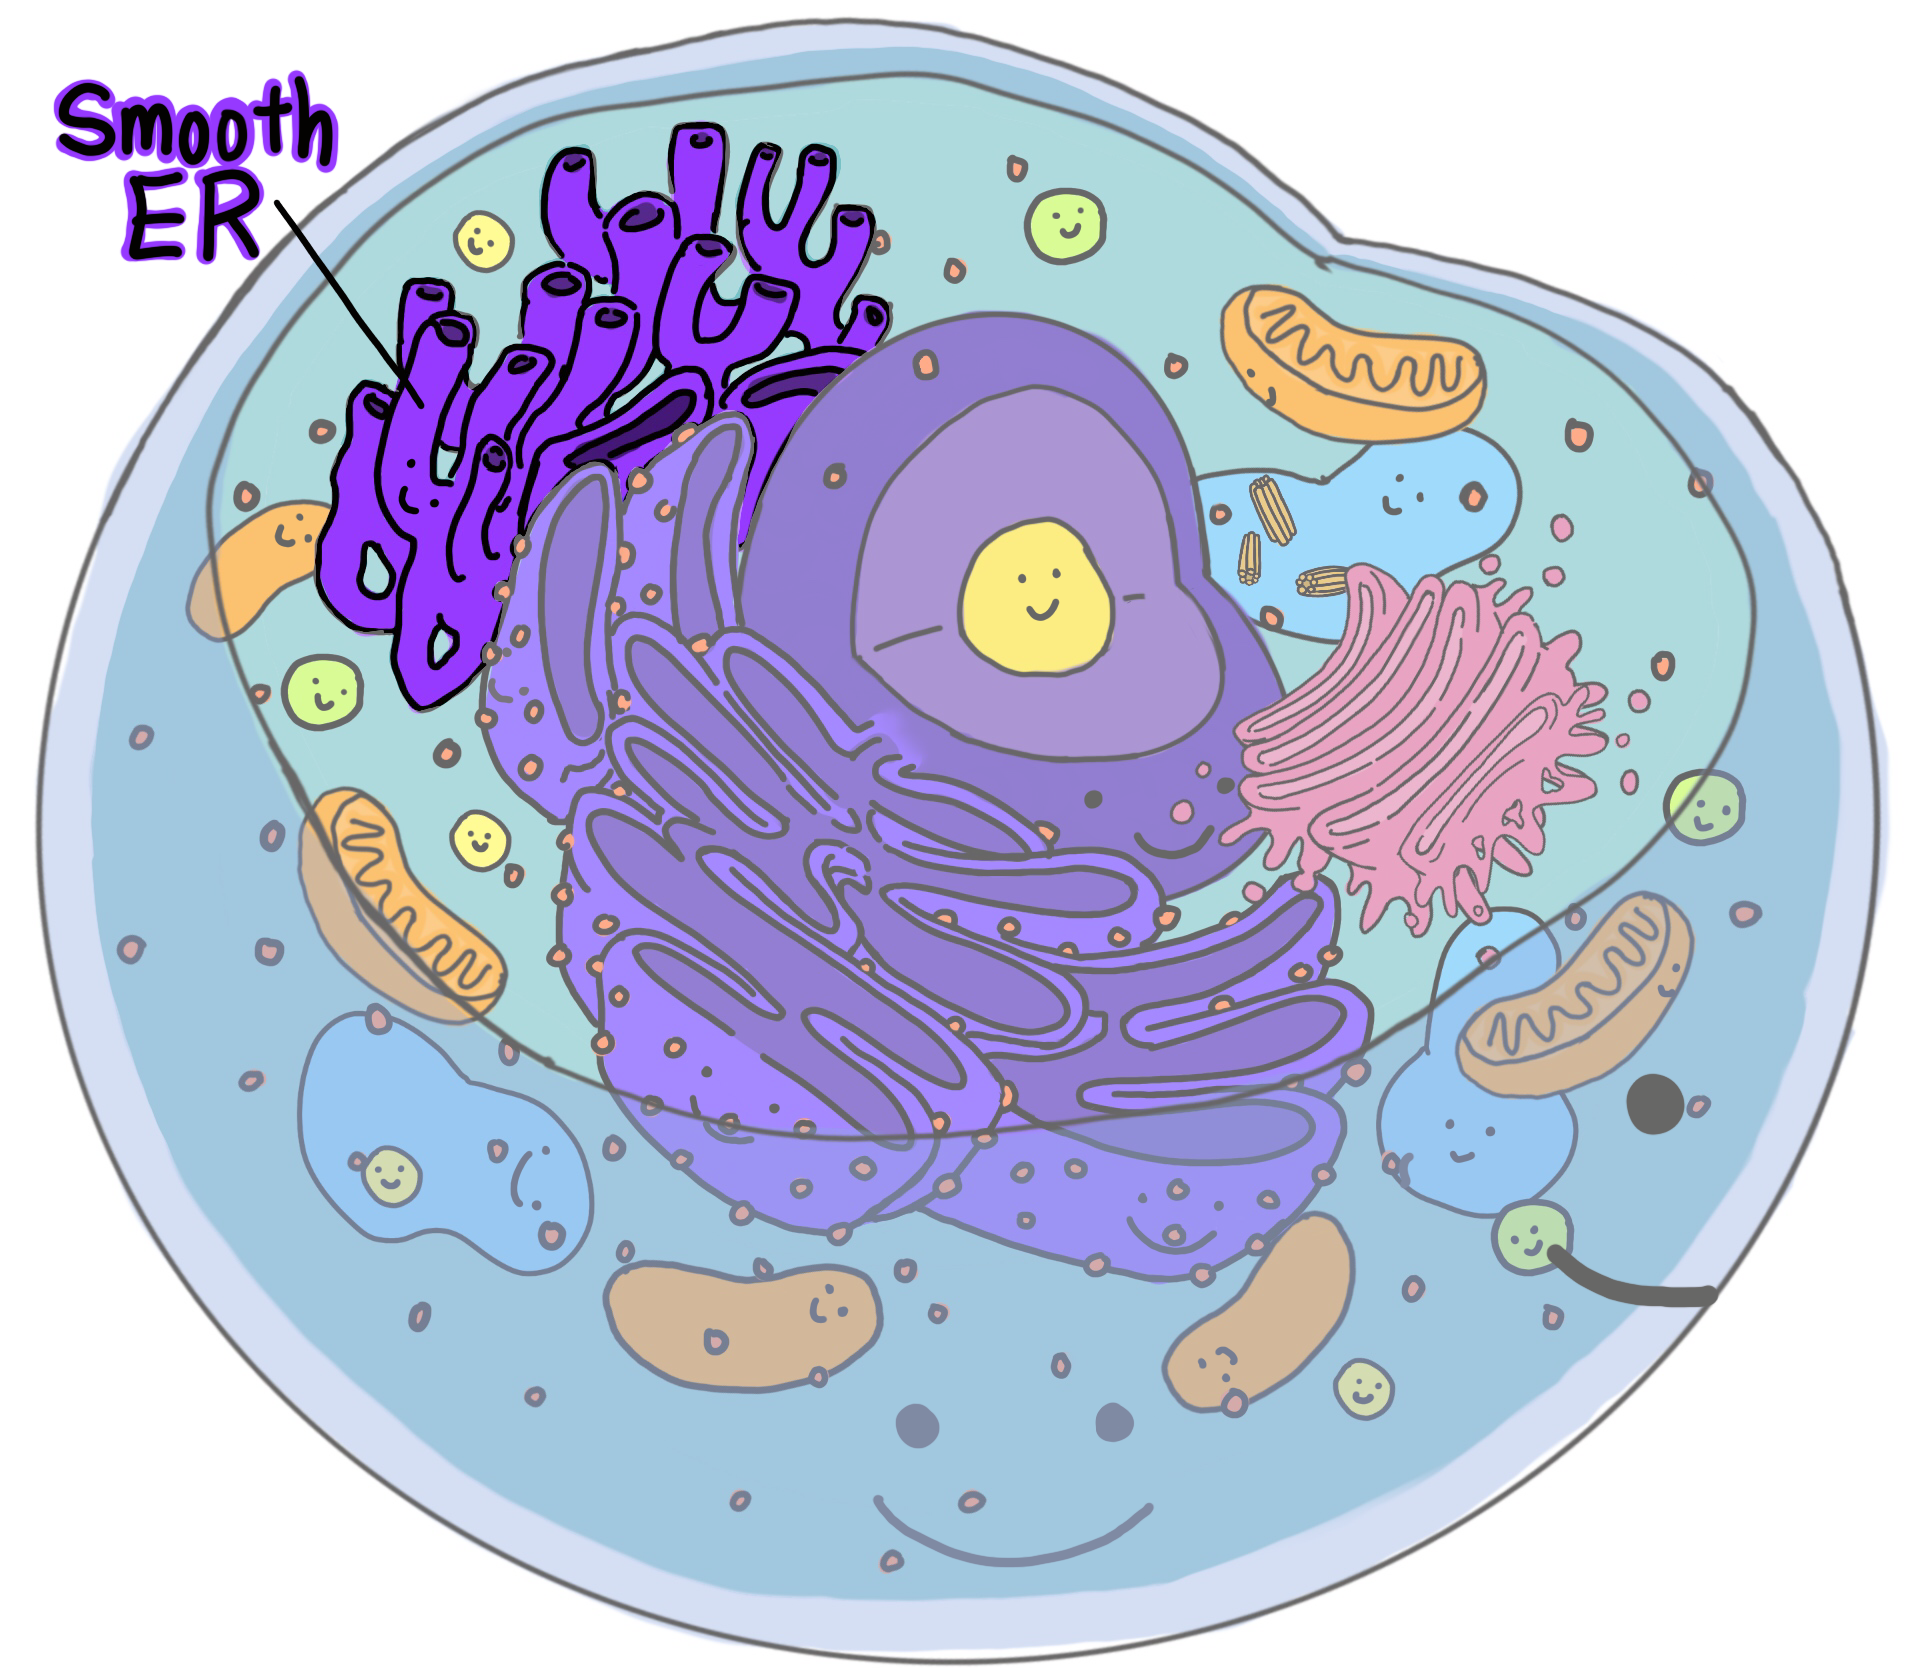 Rough Endoplasmic Reticulum Do In An Animal Cell Smooth Er And Rough 